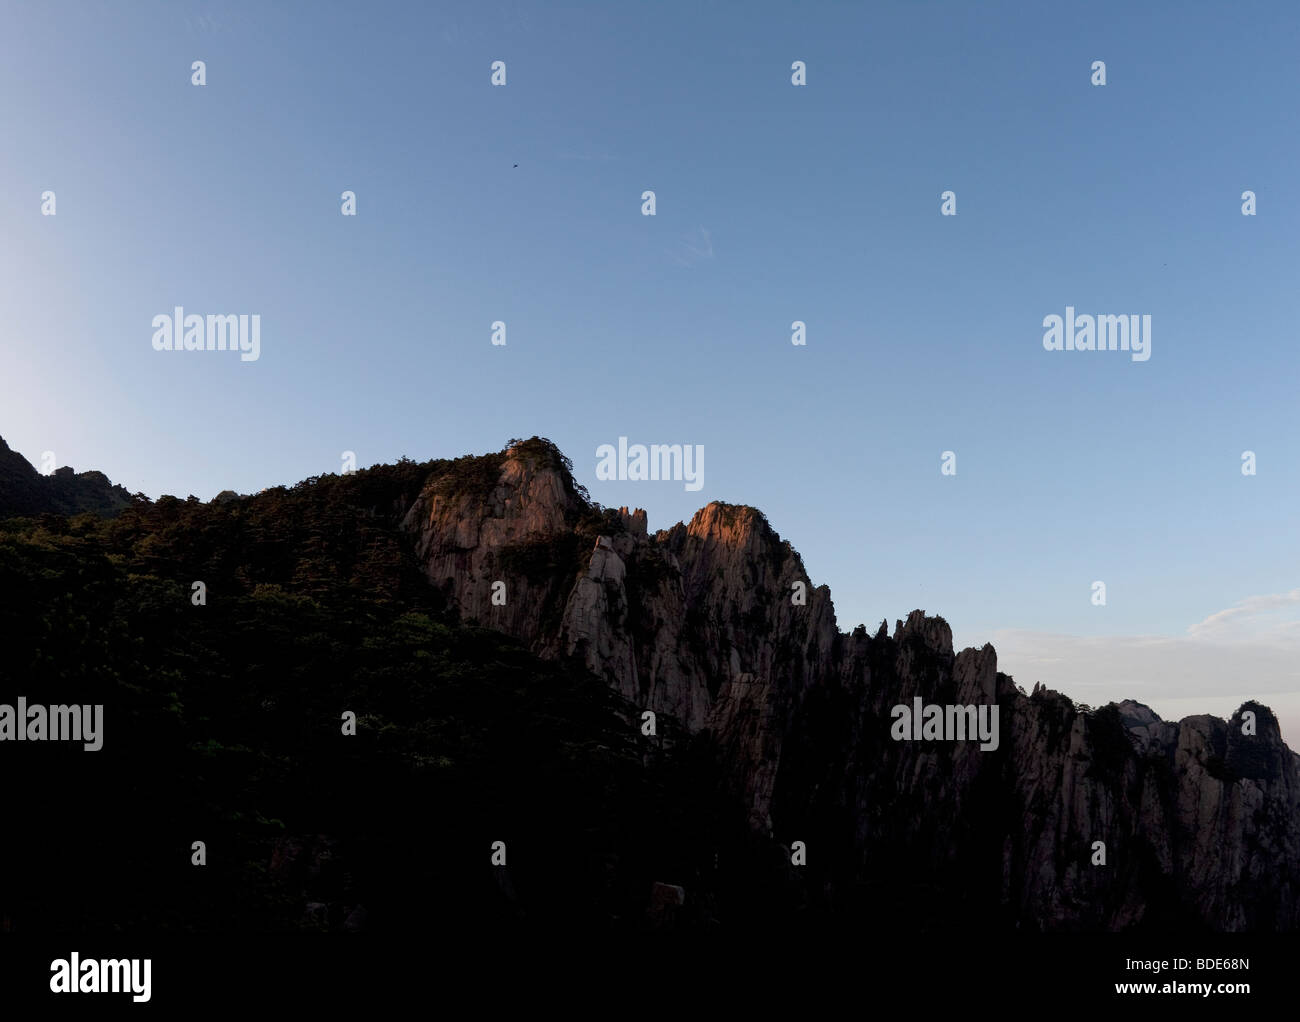 Huang Shan (Yellow Mountain), UNESCO World Heritage Site, Anhui Province, China, Asia at Sunrise Stock Photo